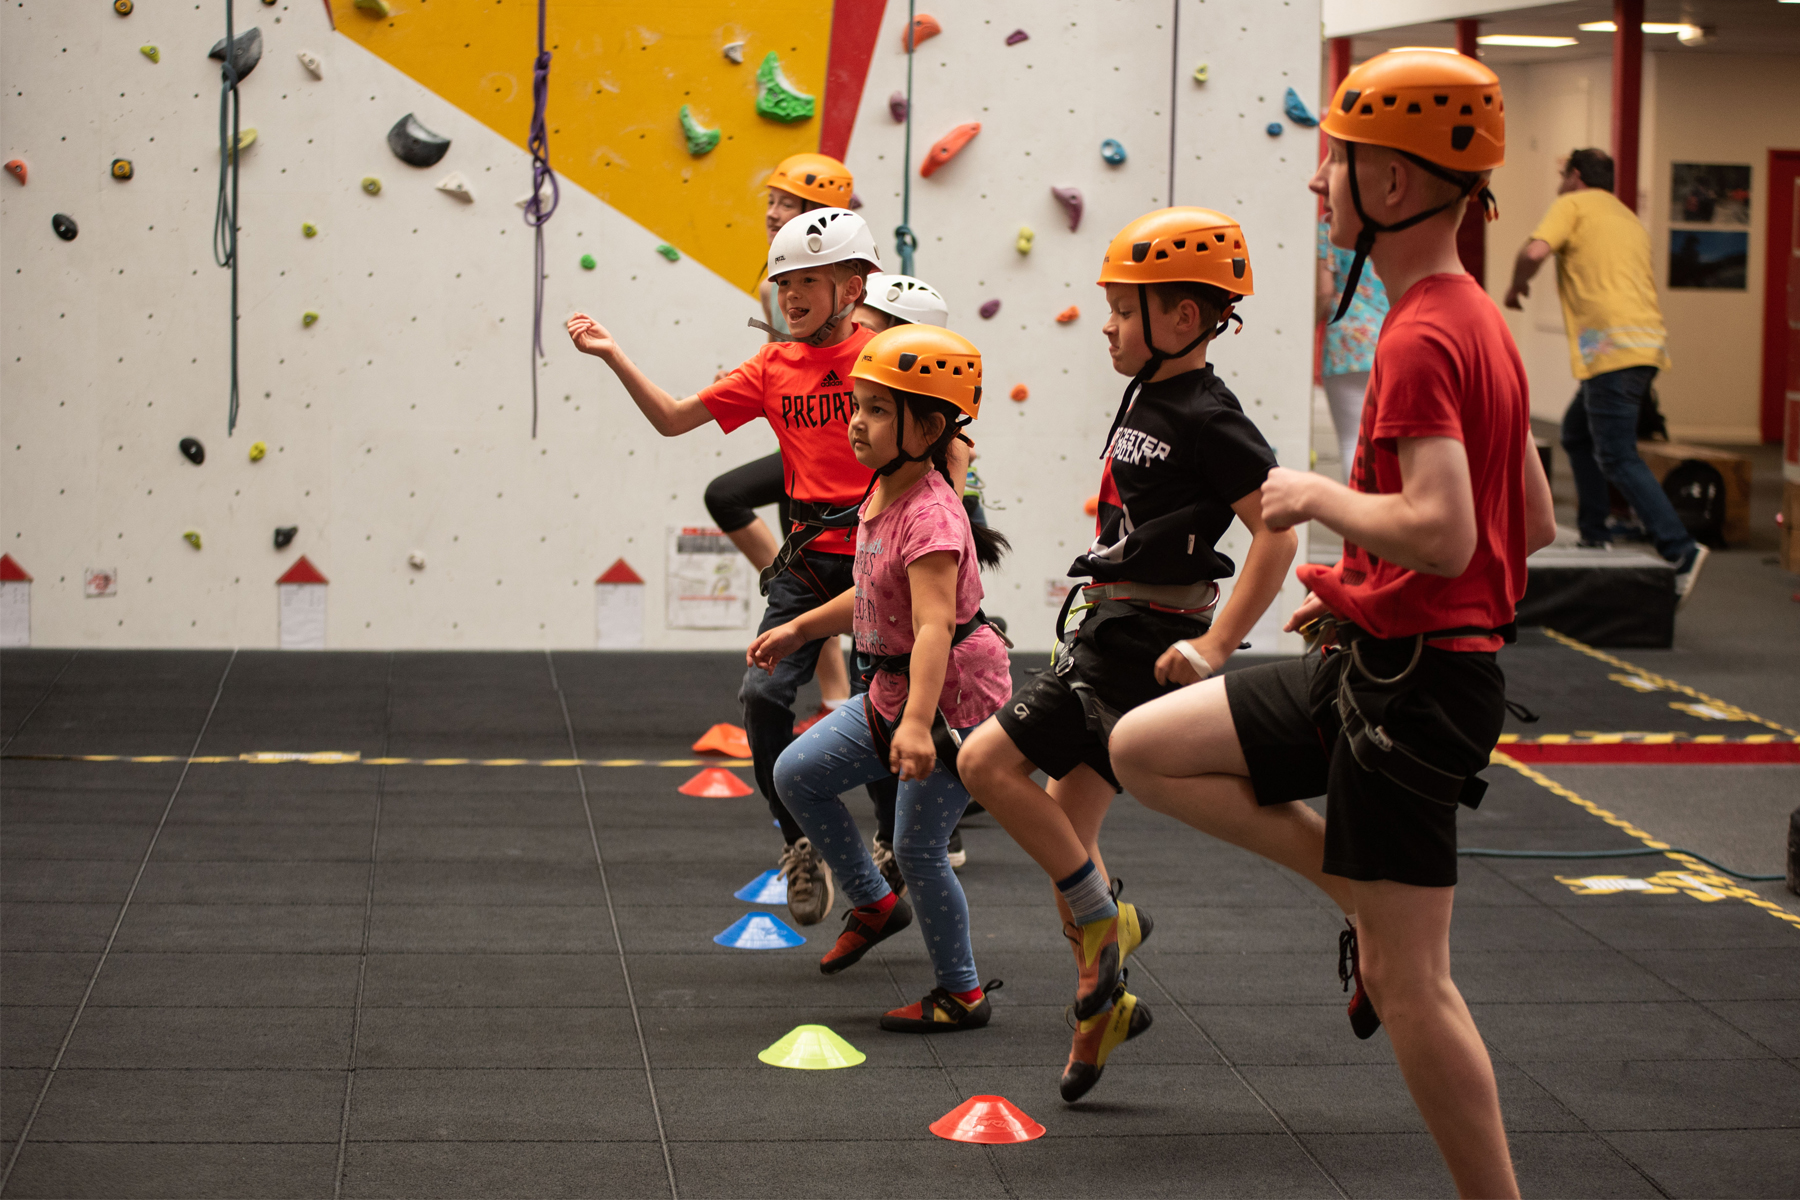 A Perfect chance to climb, relax and meet new friends! Suitable for ages 7+